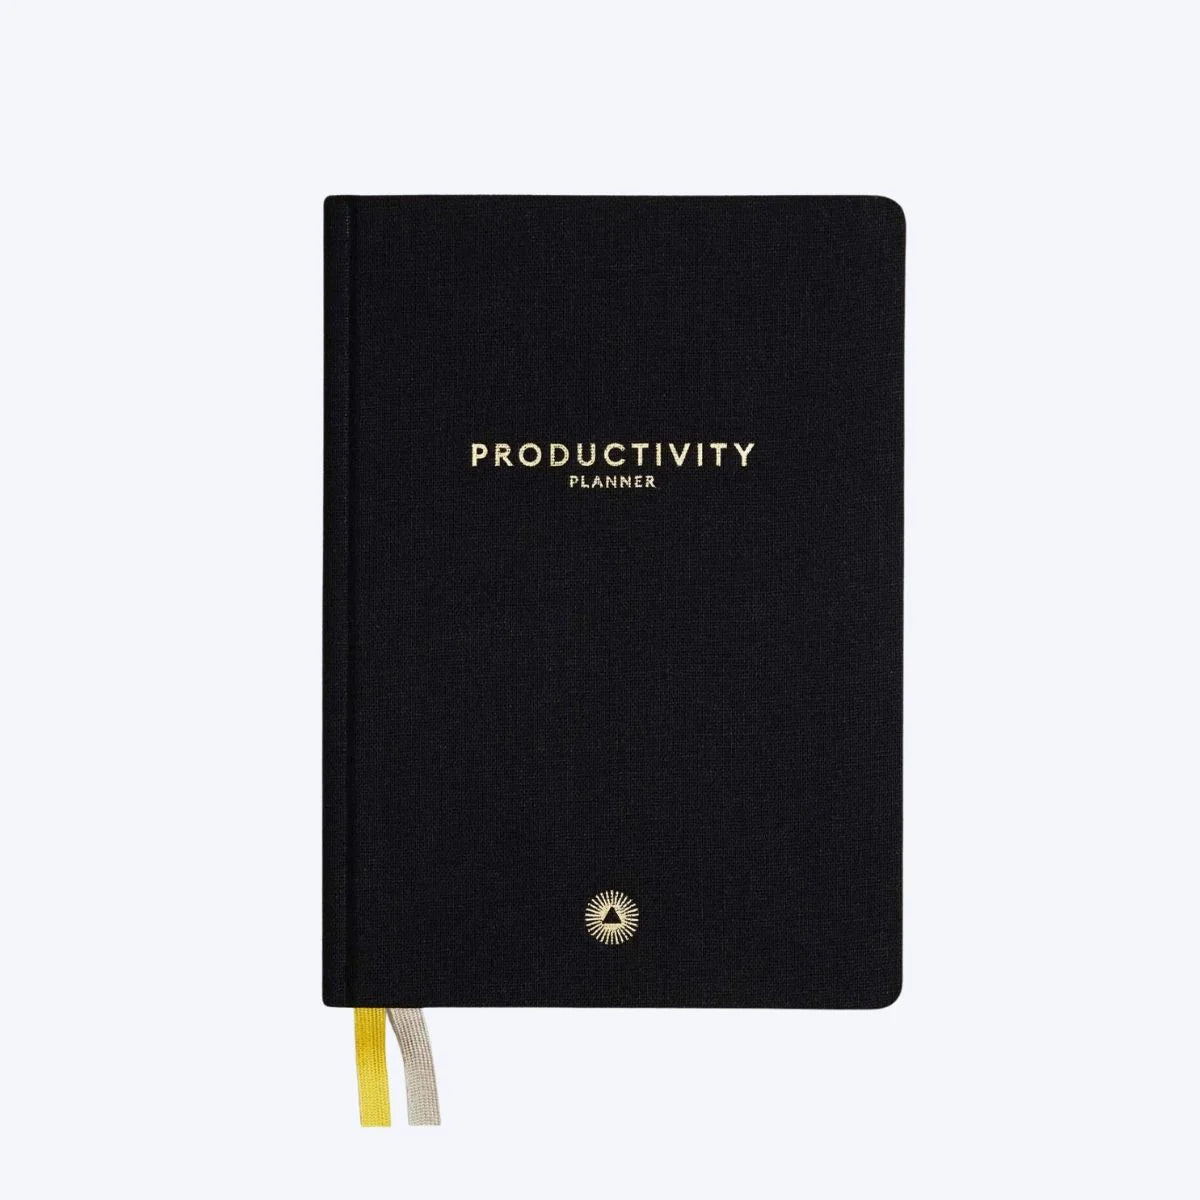 The Productivity Planner by Intelligent Change